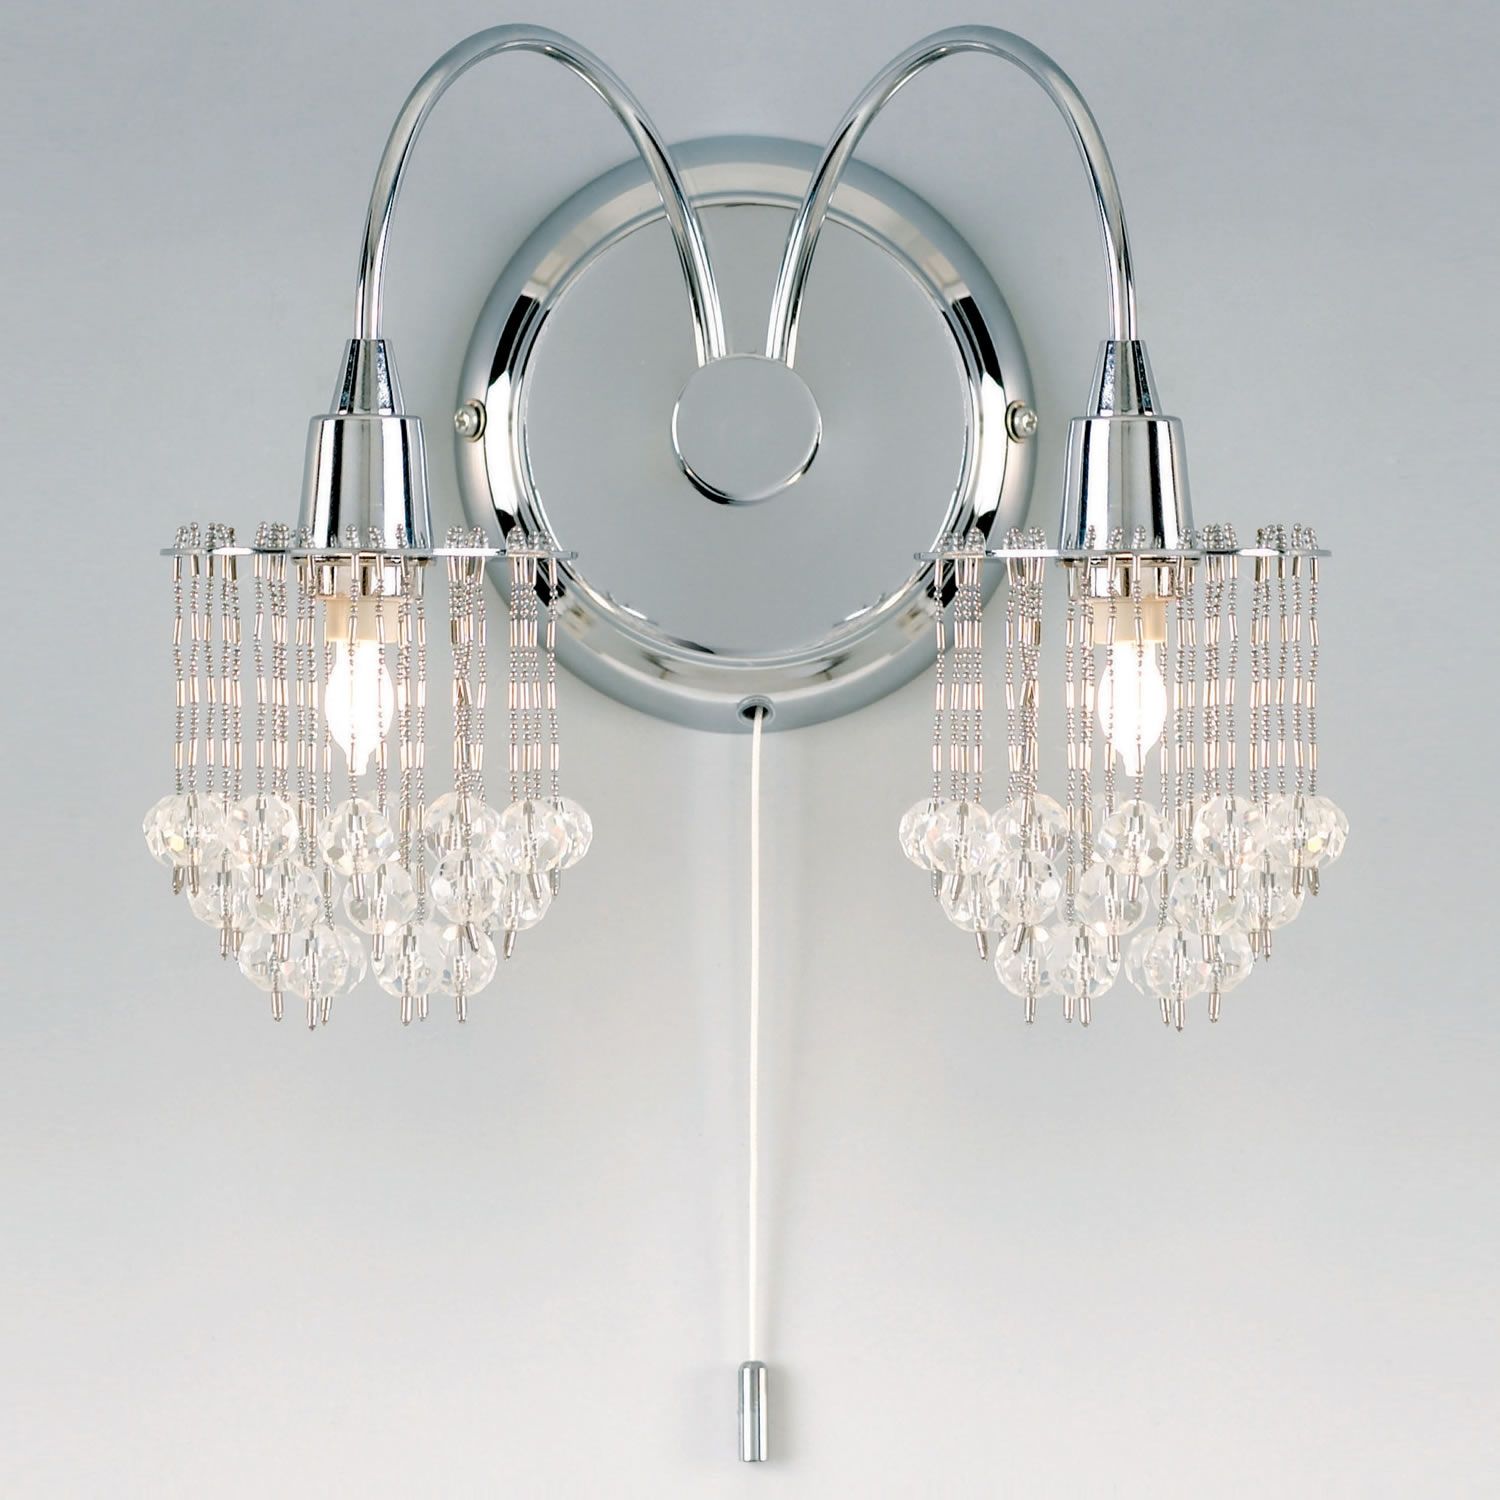 Chandelier Chandelier Wall Light Sensational Photos Inspirations With Regard To Chandelier Wall Lights (View 5 of 12)